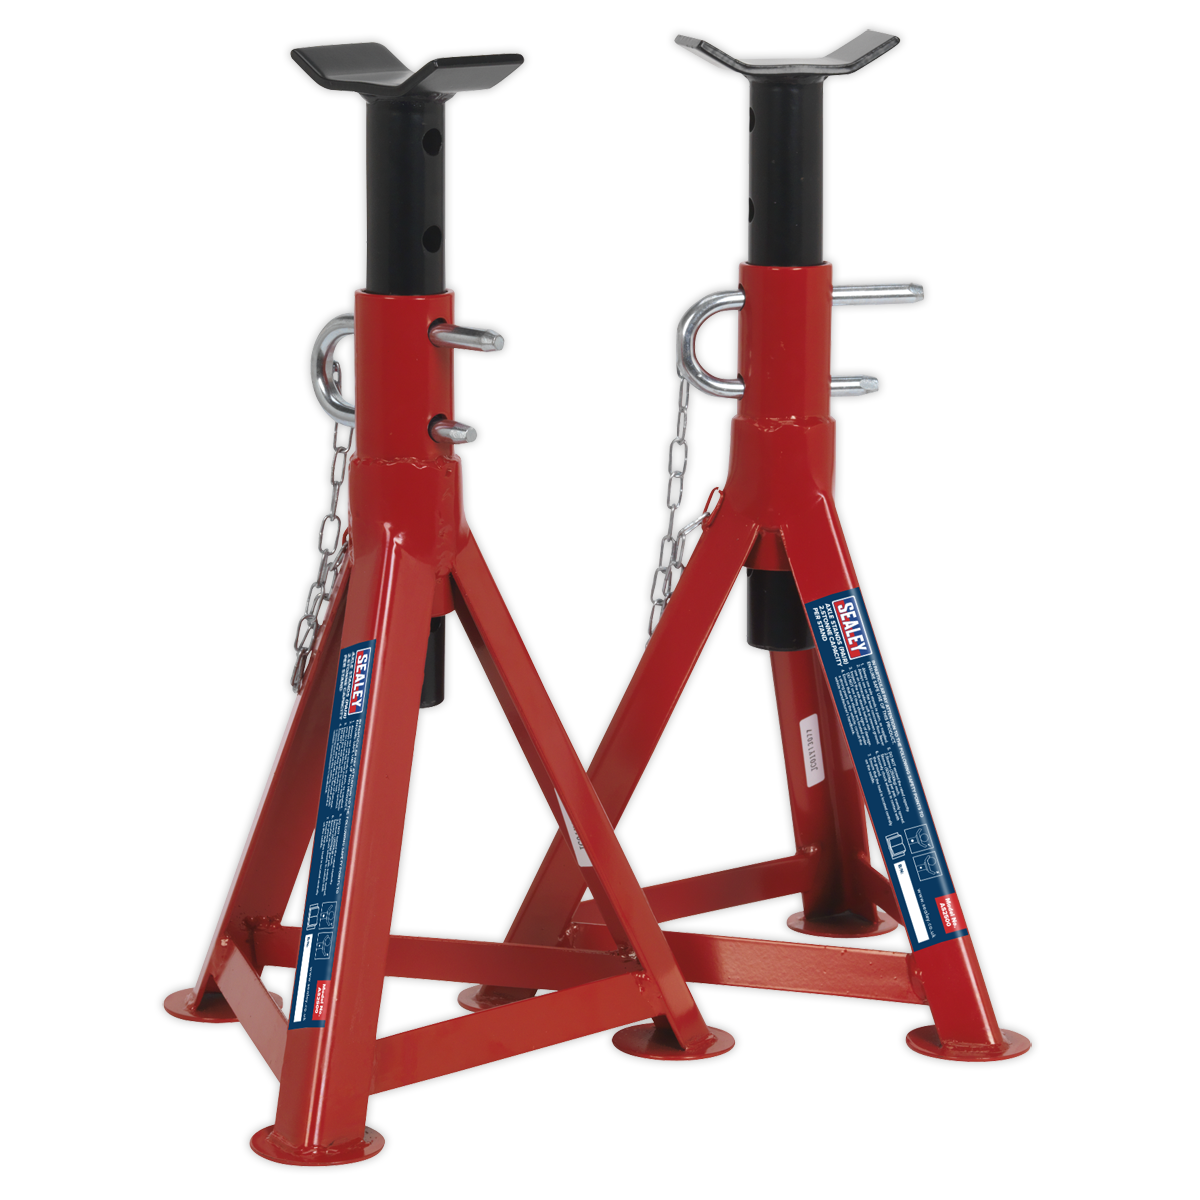 Sealey support axle stands